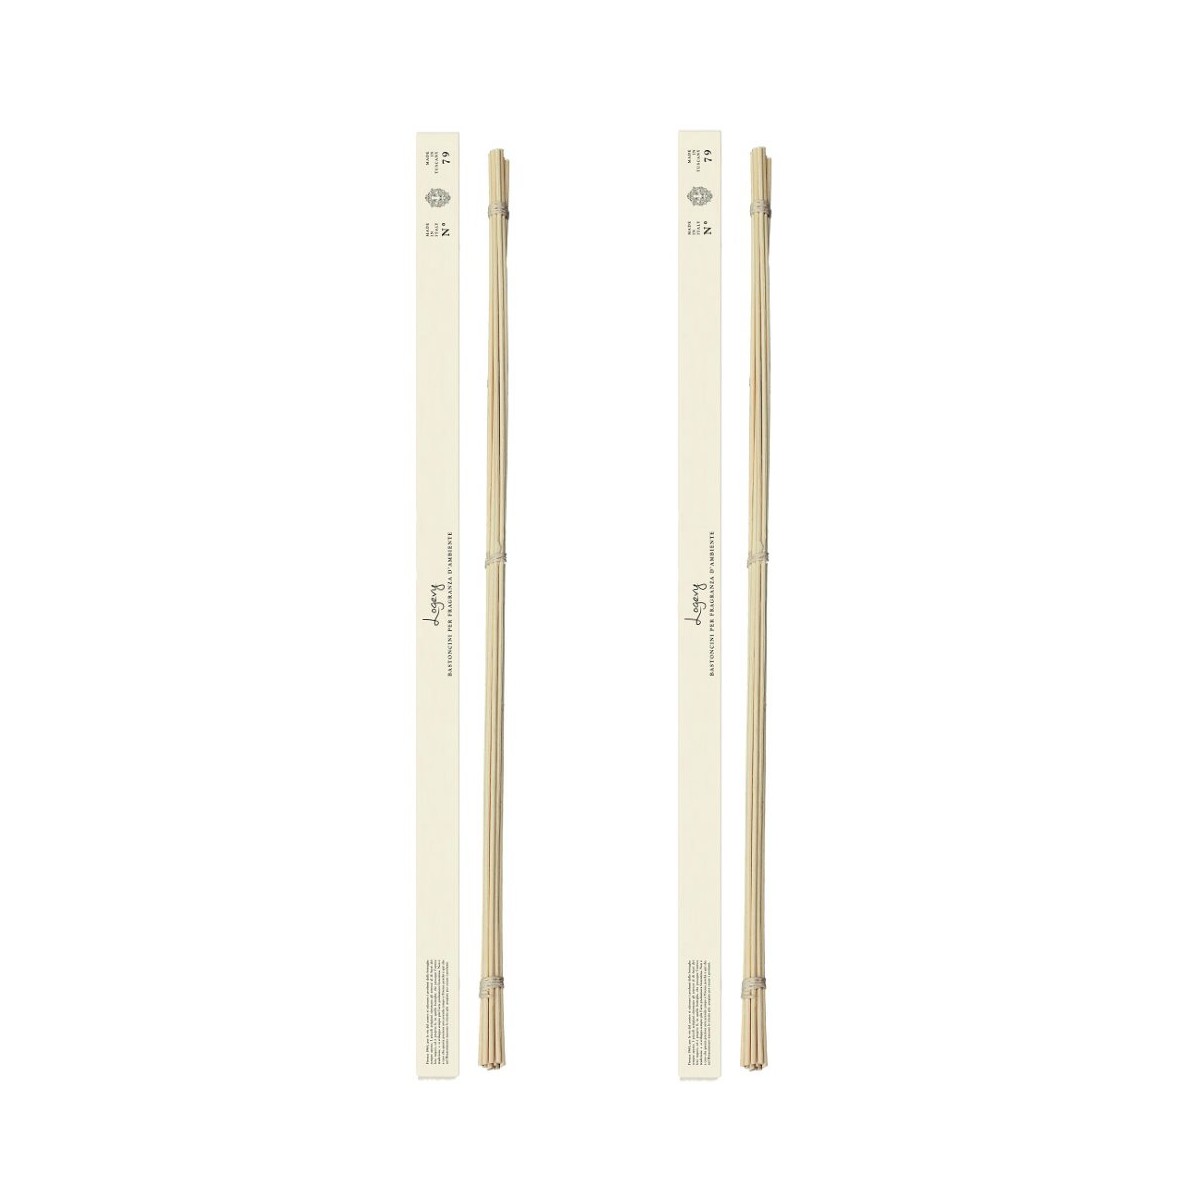 500 ml sticks for Logevy Diffusers - 2 Packs of 12